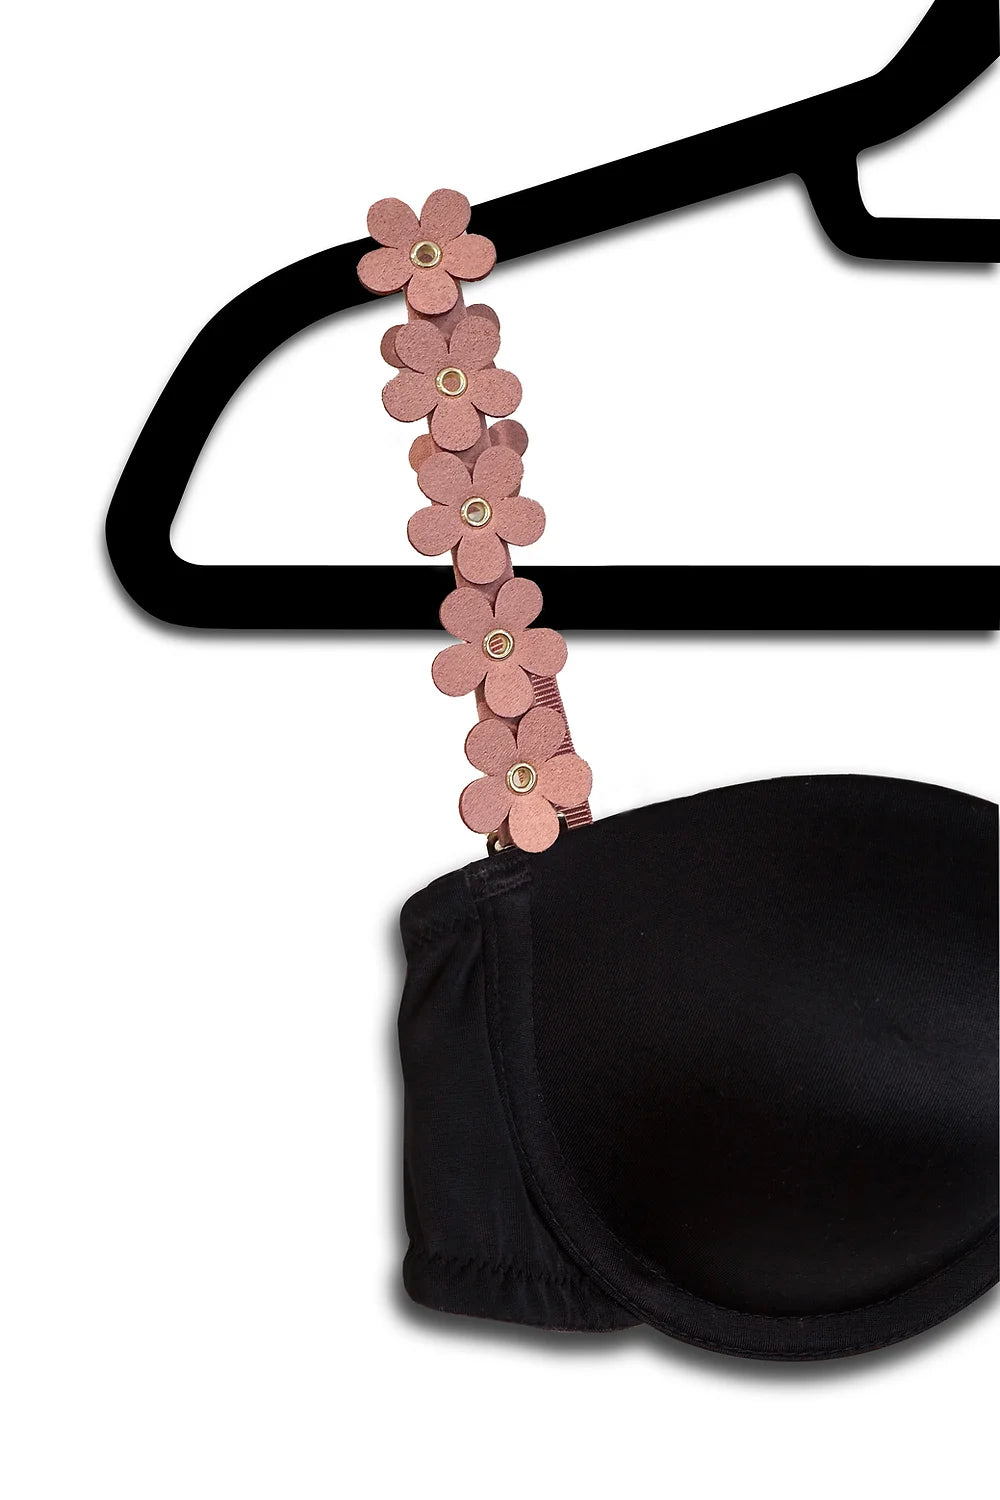 Blush Suede Vegan Flower Bra Strap-260 Other Accessories-Strap-its-Coastal Bloom Boutique, find the trendiest versions of the popular styles and looks Located in Indialantic, FL